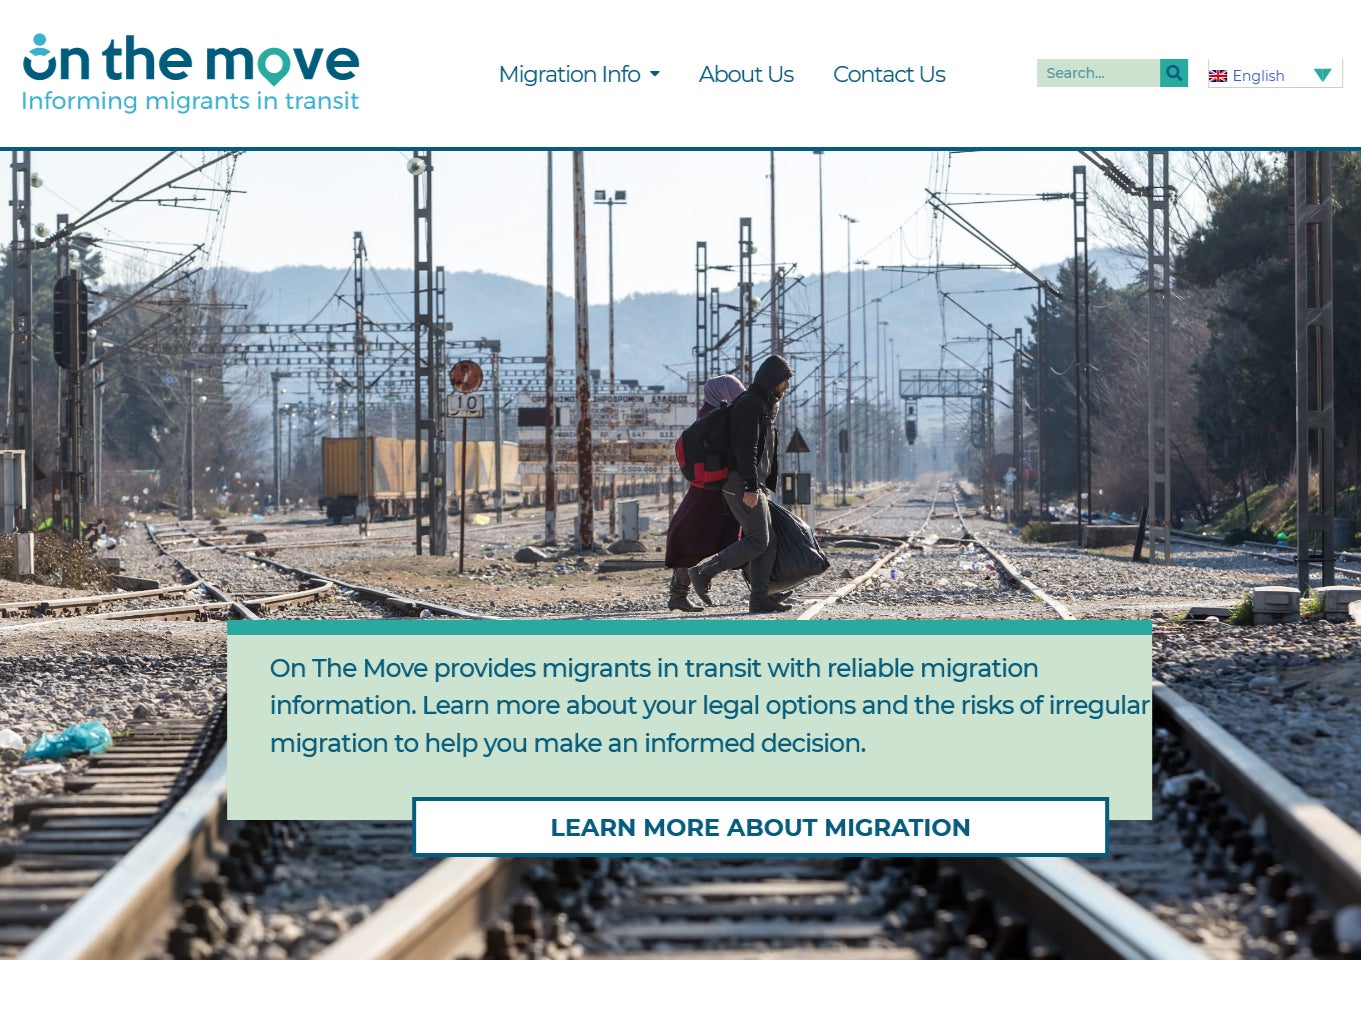 The On The Move website was set up by the Home Office but does not disclose its affiliation